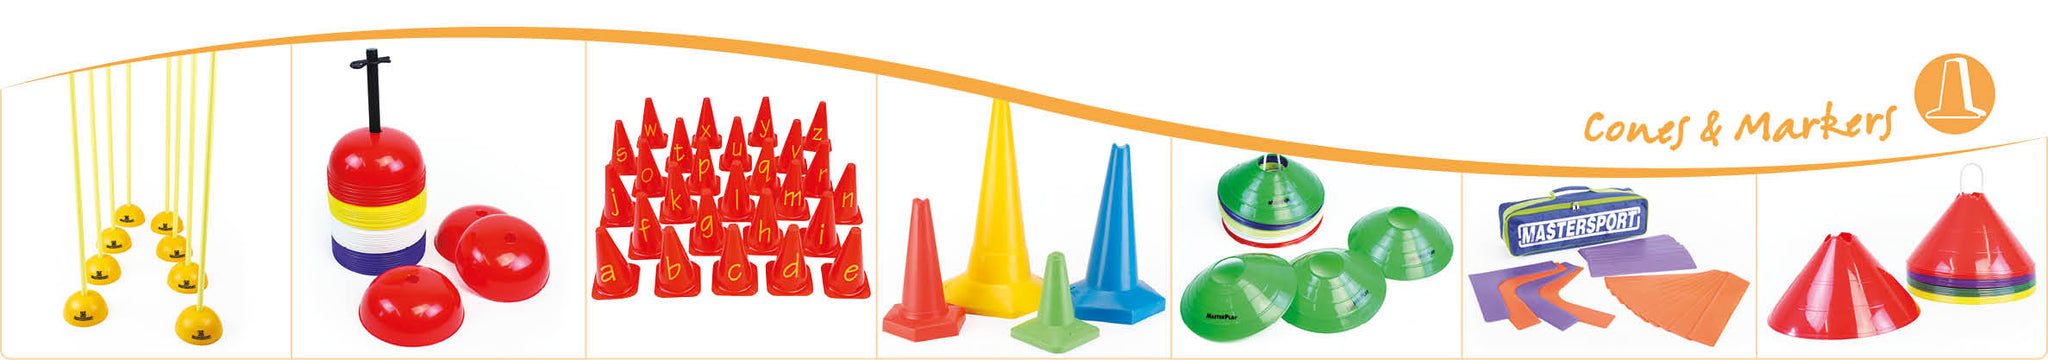 cones and markers